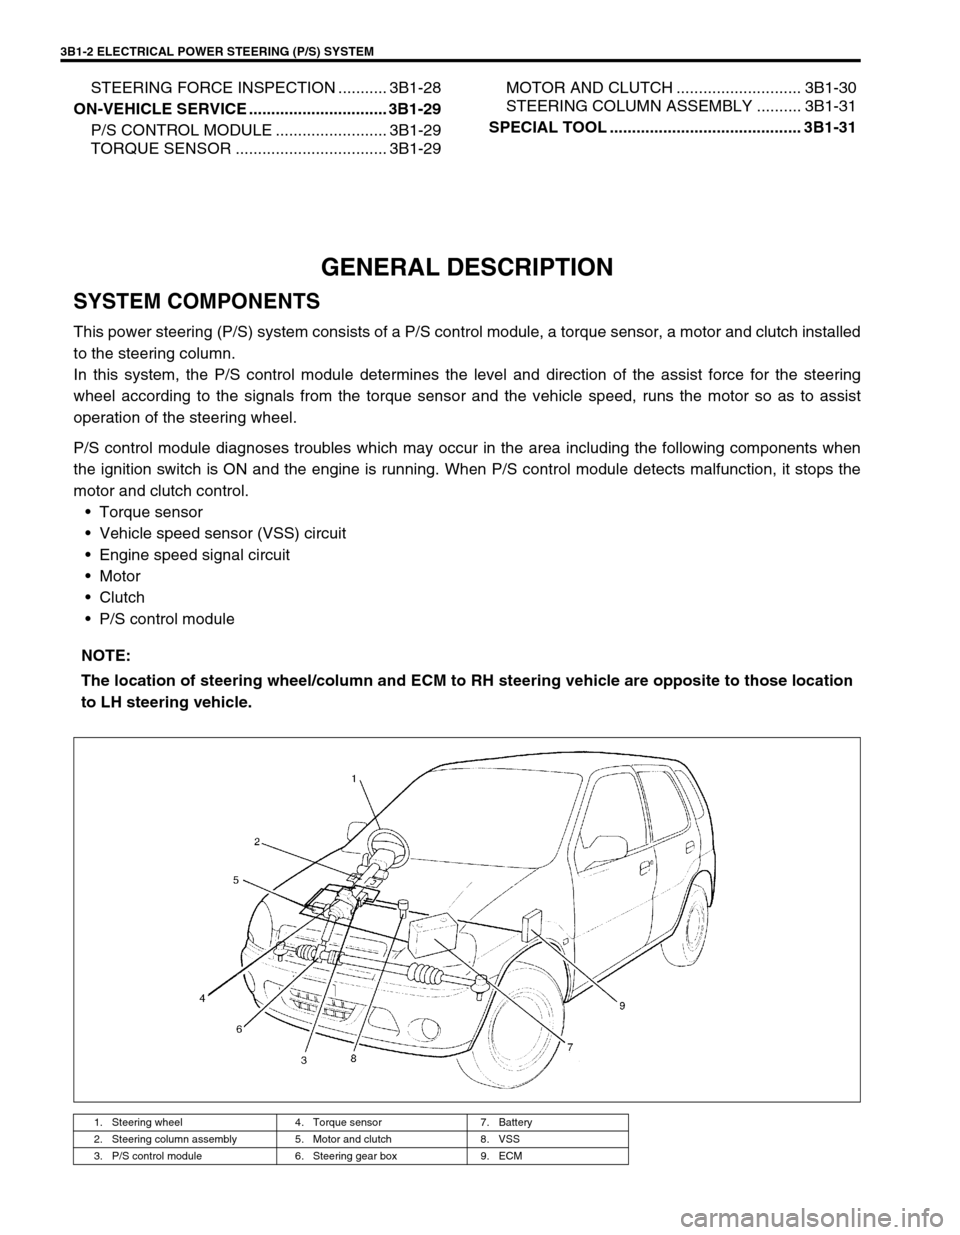 SUZUKI SWIFT 2000 1.G RG413 Service Owners Manual 3B1-2 ELECTRICAL POWER STEERING (P/S) SYSTEM
STEERING FORCE INSPECTION ........... 3B1-28
ON-VEHICLE SERVICE ............................... 3B1-29
P/S CONTROL MODULE ......................... 3B1-29
